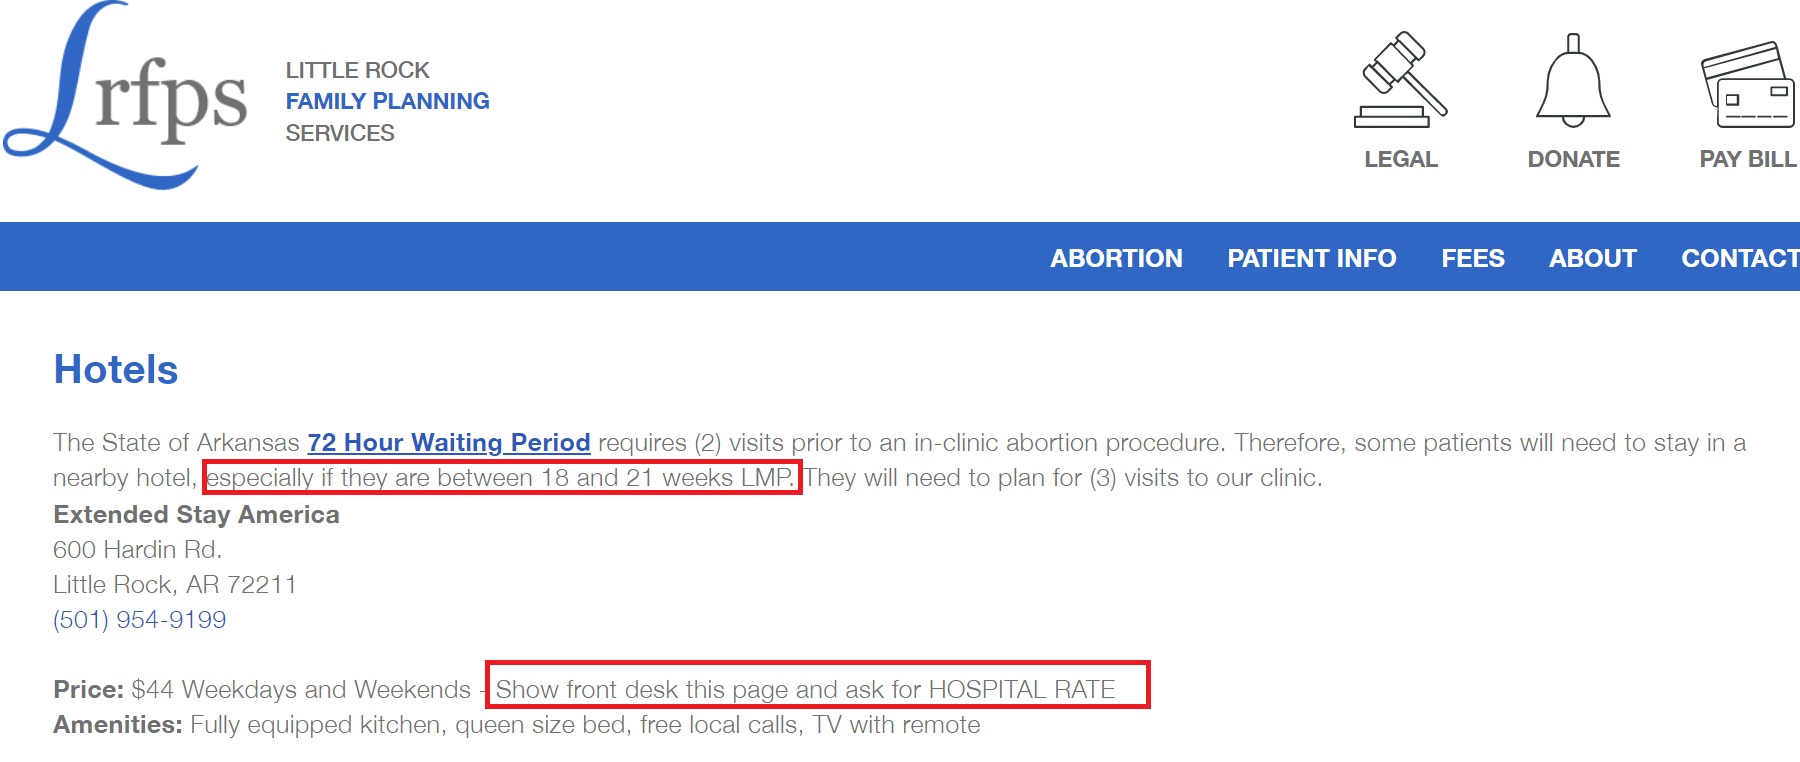 Image: Little Rock Family Planning abortion clinic special rates at Extended Stay America